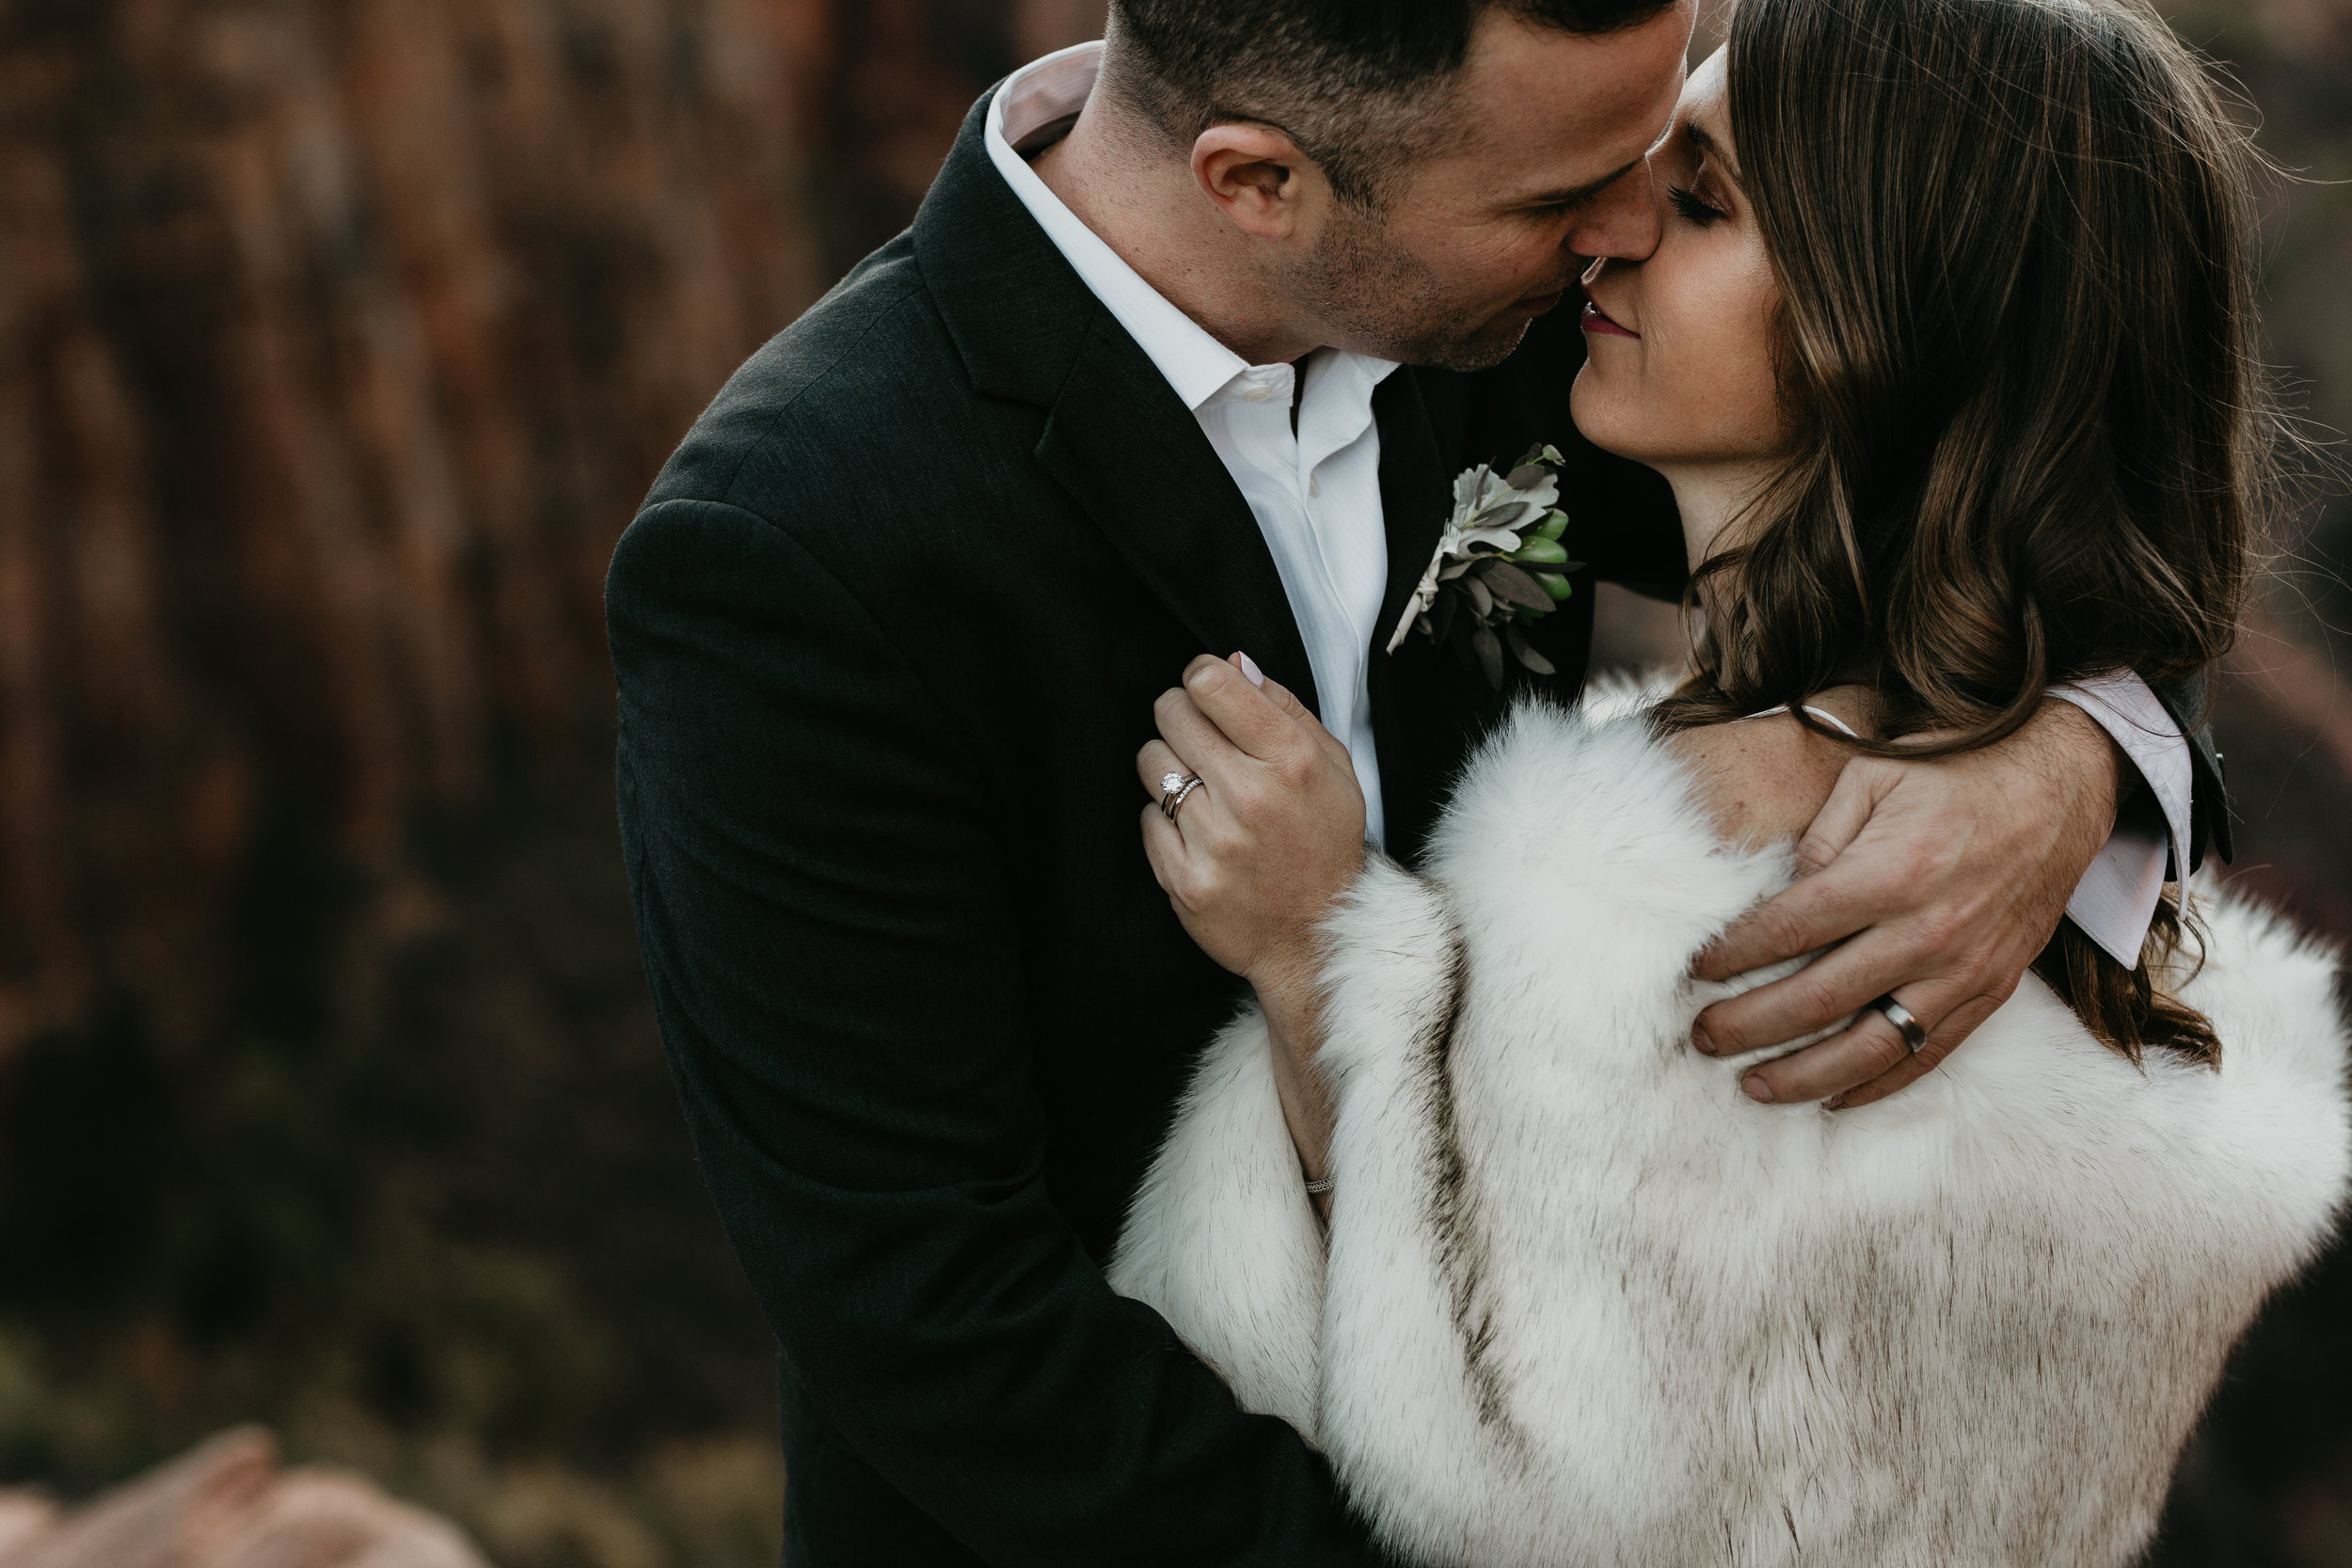 nicole-daacke-photography-zion-national-park-elopement-photographer-canyon-overlook-trail-elope-hiking-adventure-wedding-photos-fall-utah-red-rock-canyon-stgeorge-eloping-photographer-71.jpg